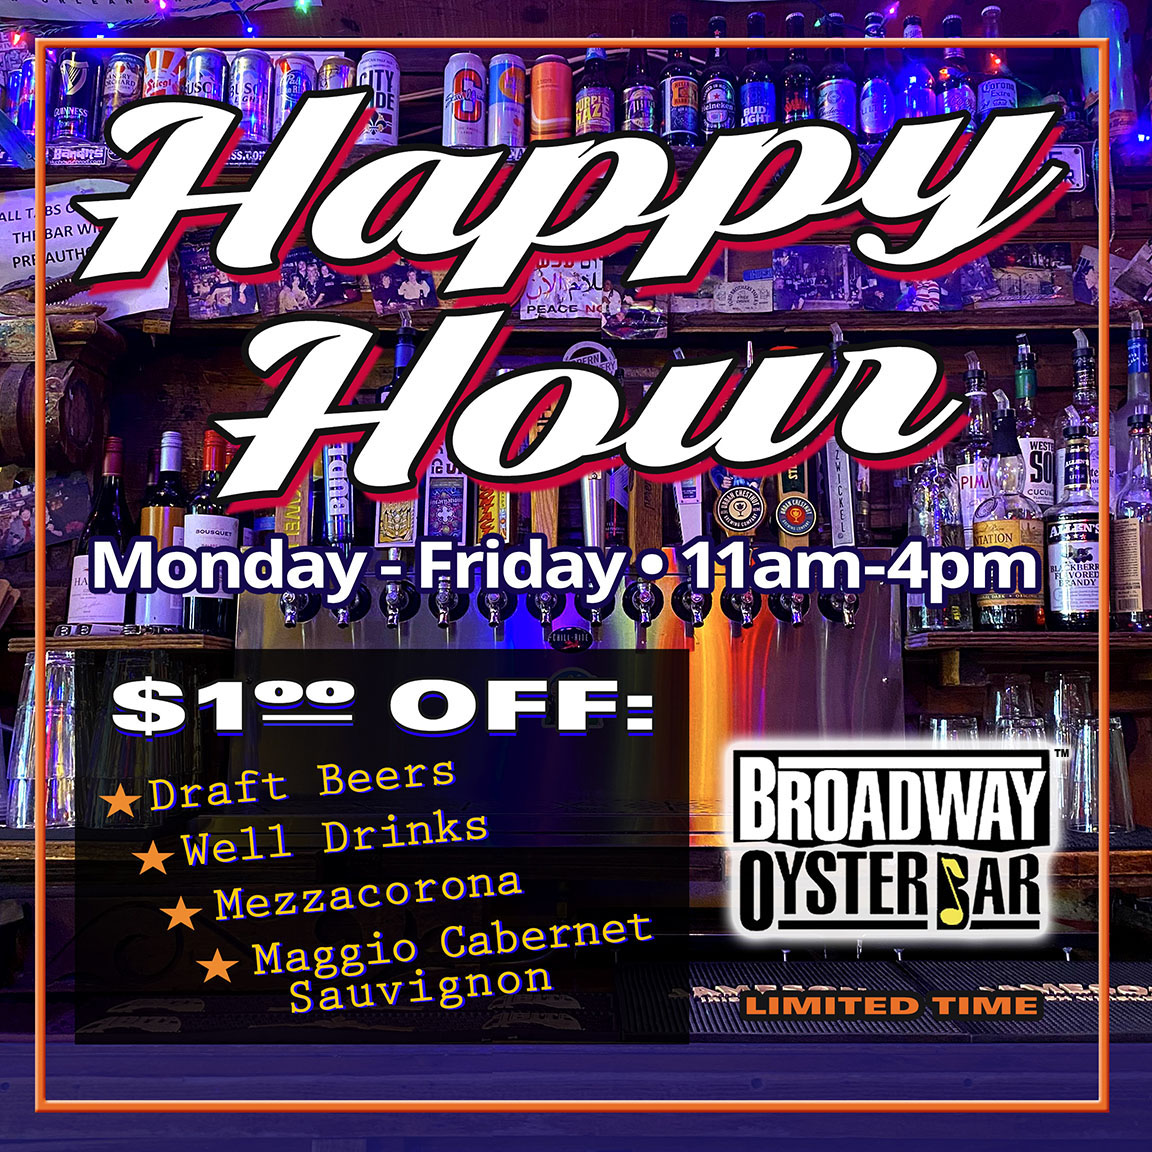 broadway-oyster-bar- Happy Hour 11 am - 4 p